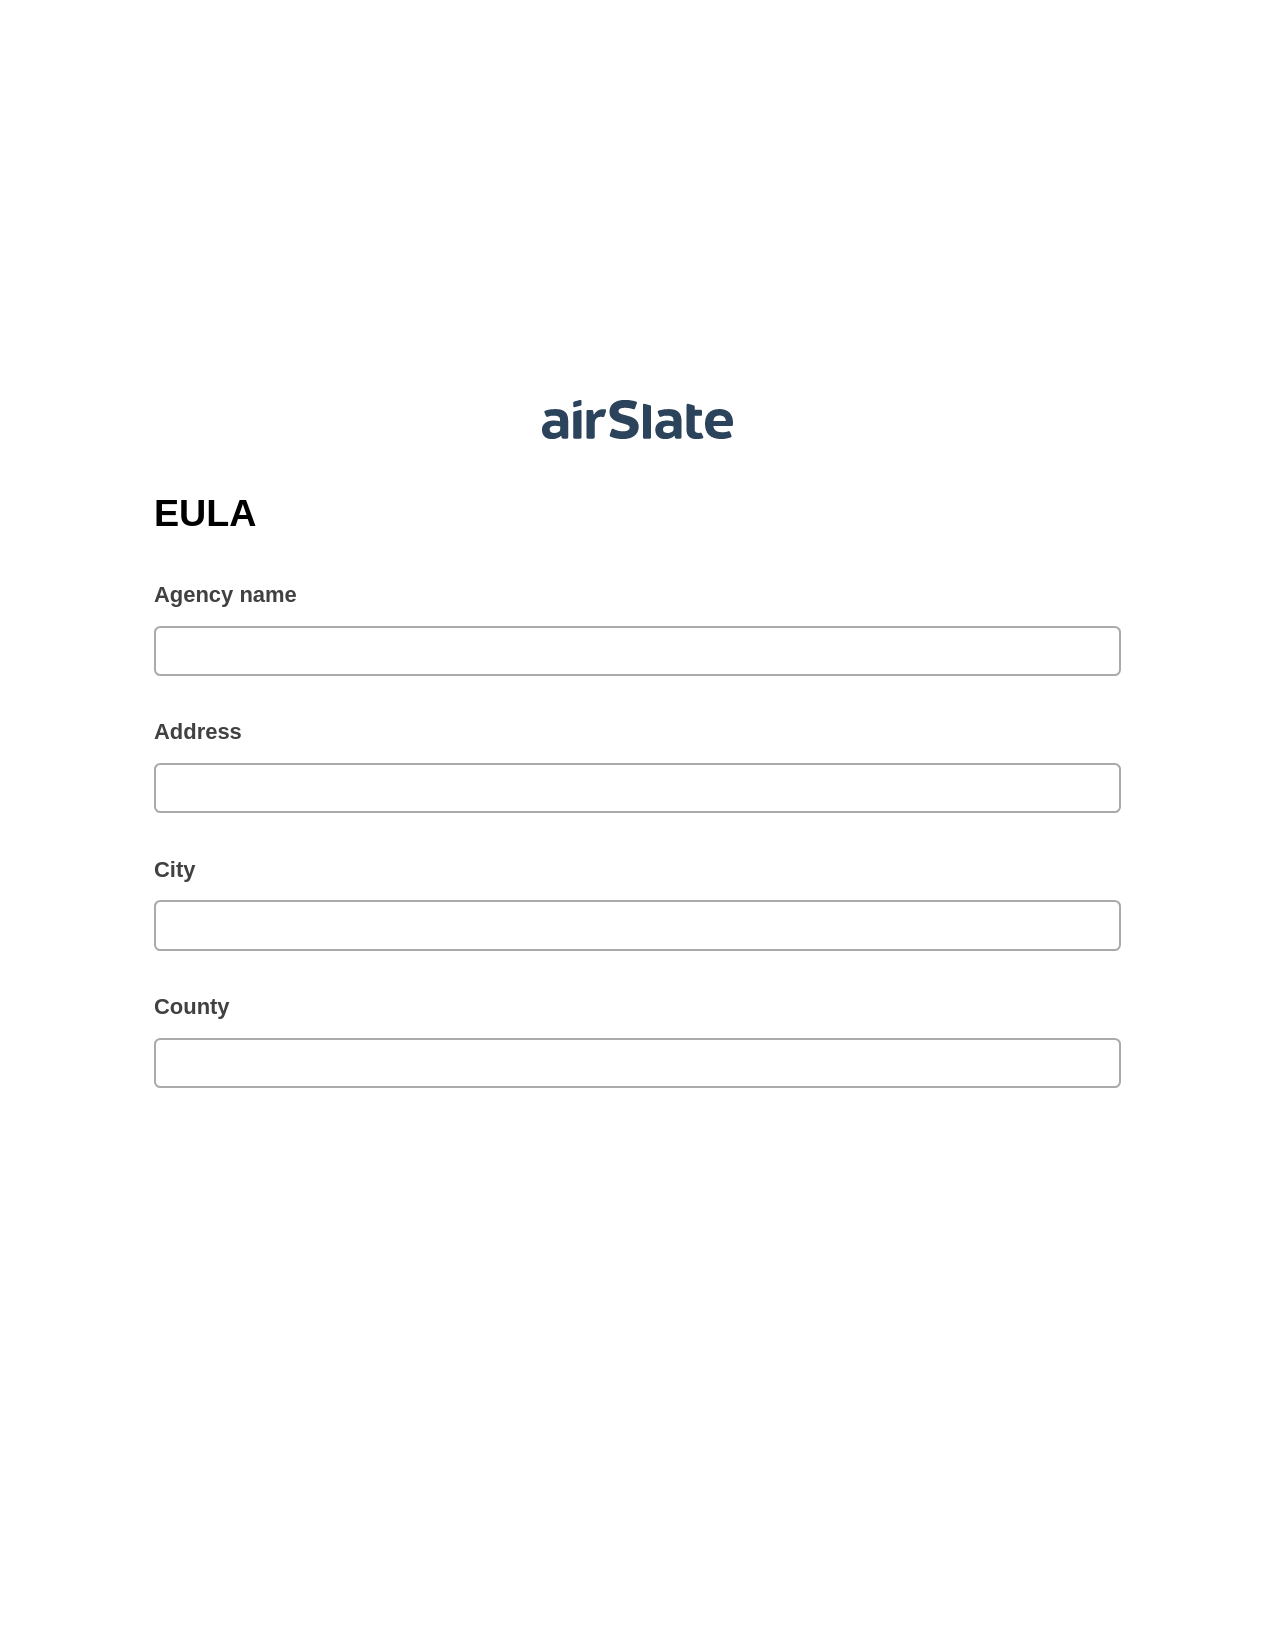 EULA Pre-fill Slate from MS Dynamics 365 Records Bot, Unassign Role Bot, Email Notification Postfinish Bot